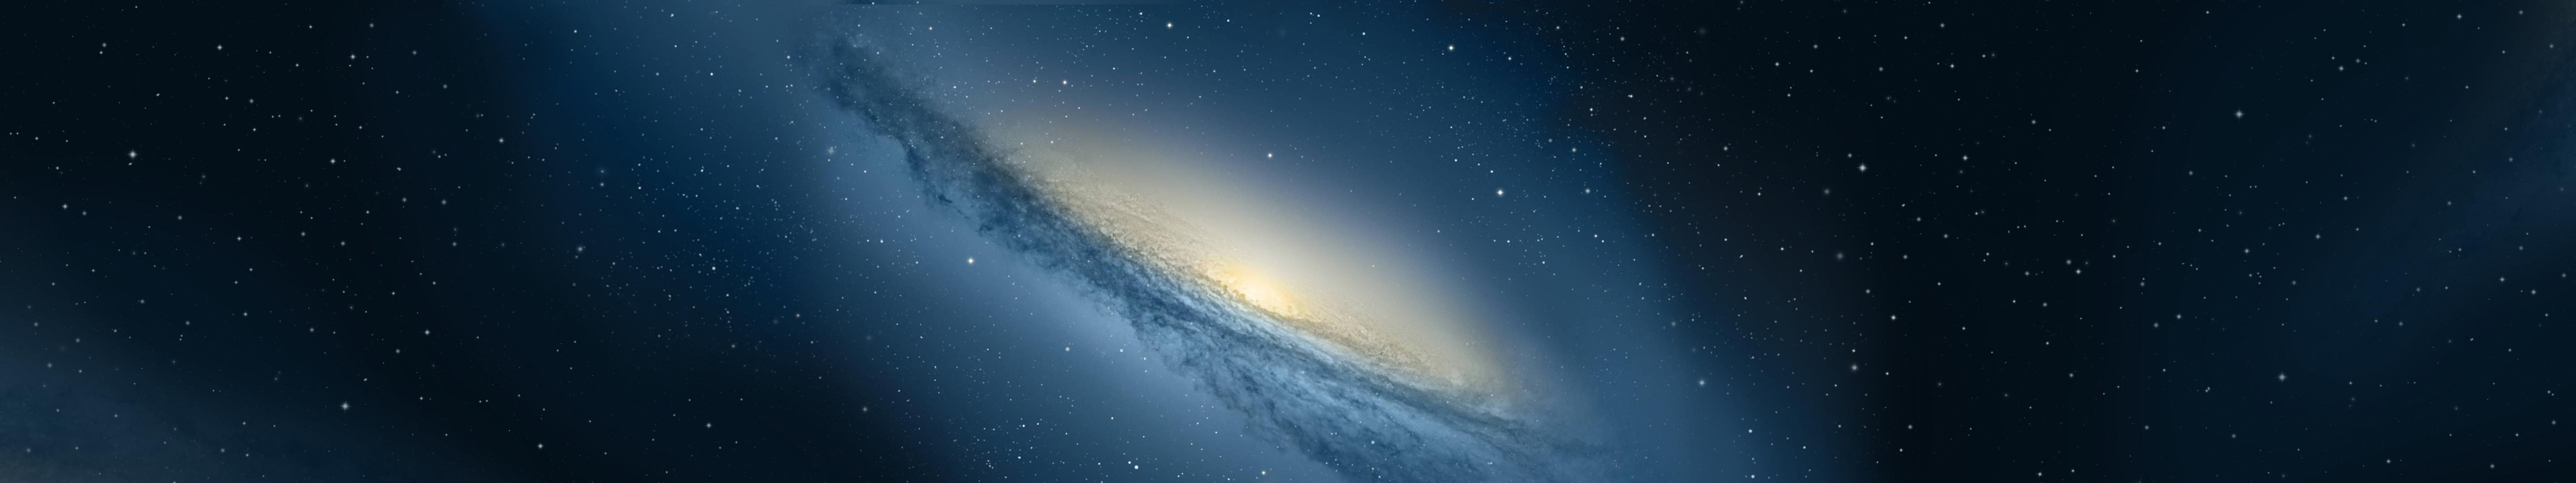 5760 X 1080 Galaxy Wallpapers - Top Free 5760 X 1080 Galaxy Backgrounds